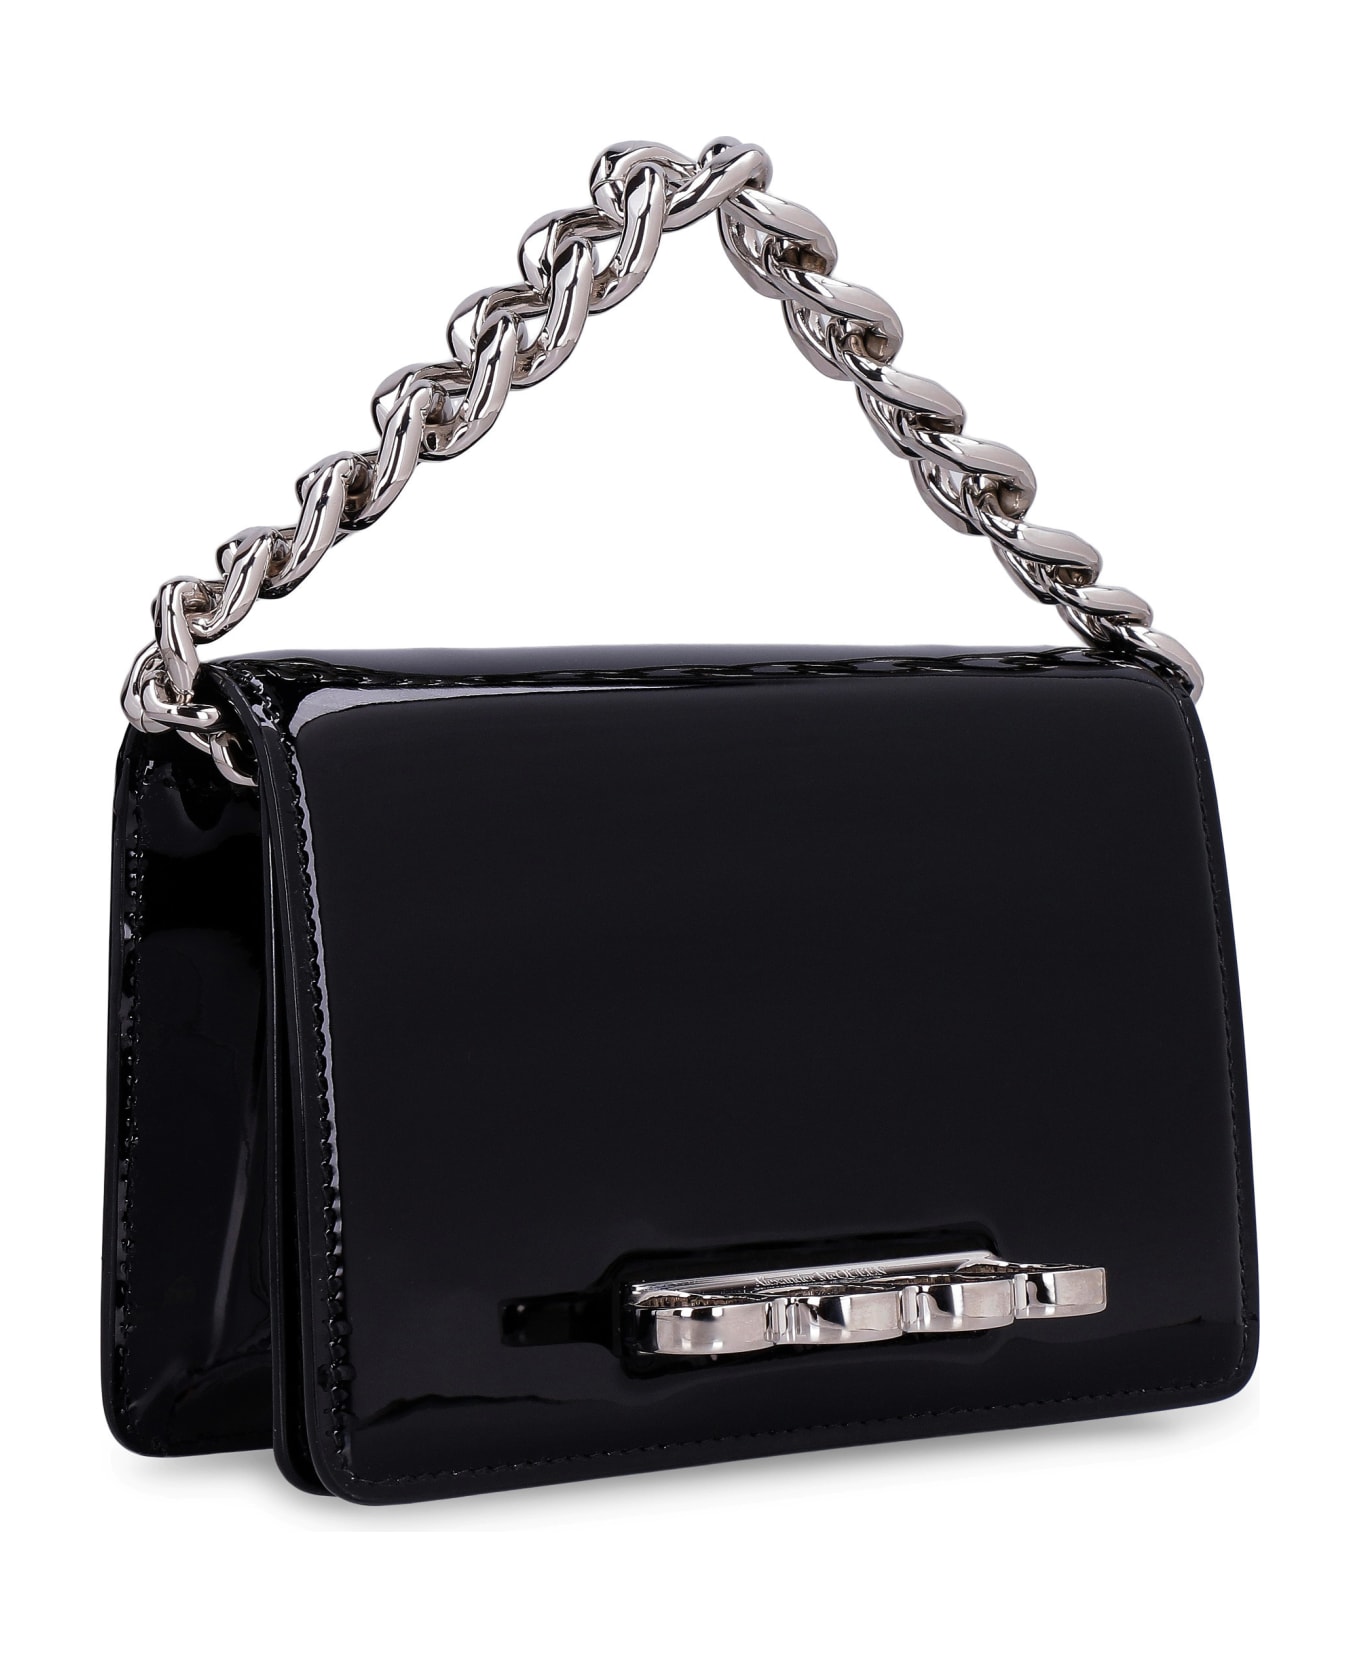 Alexander McQueen The Four Ring Mini Patent Leather Bag - Black ショルダーバッグ